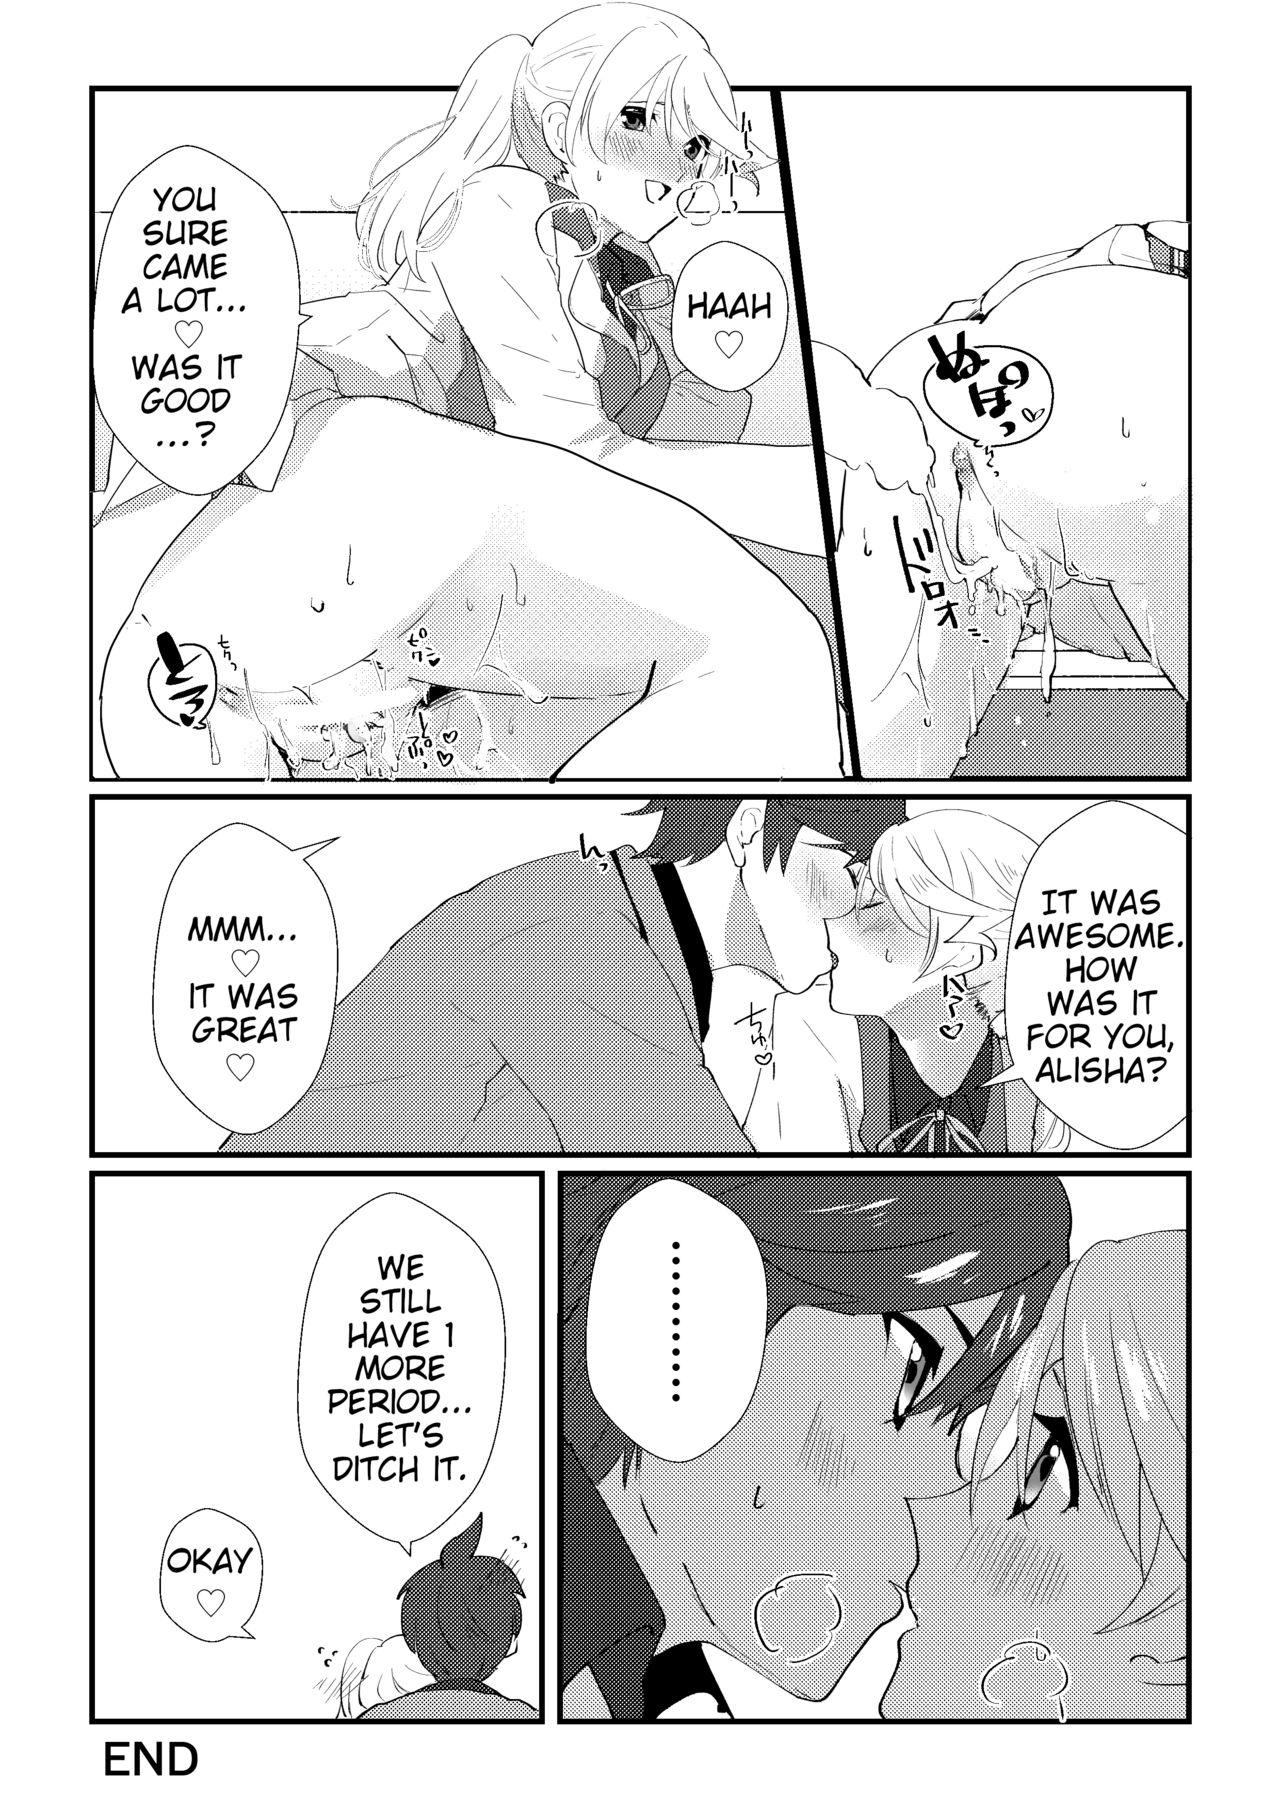 Sexcam crazy about you - Tales of zestiria Celeb - Page 10